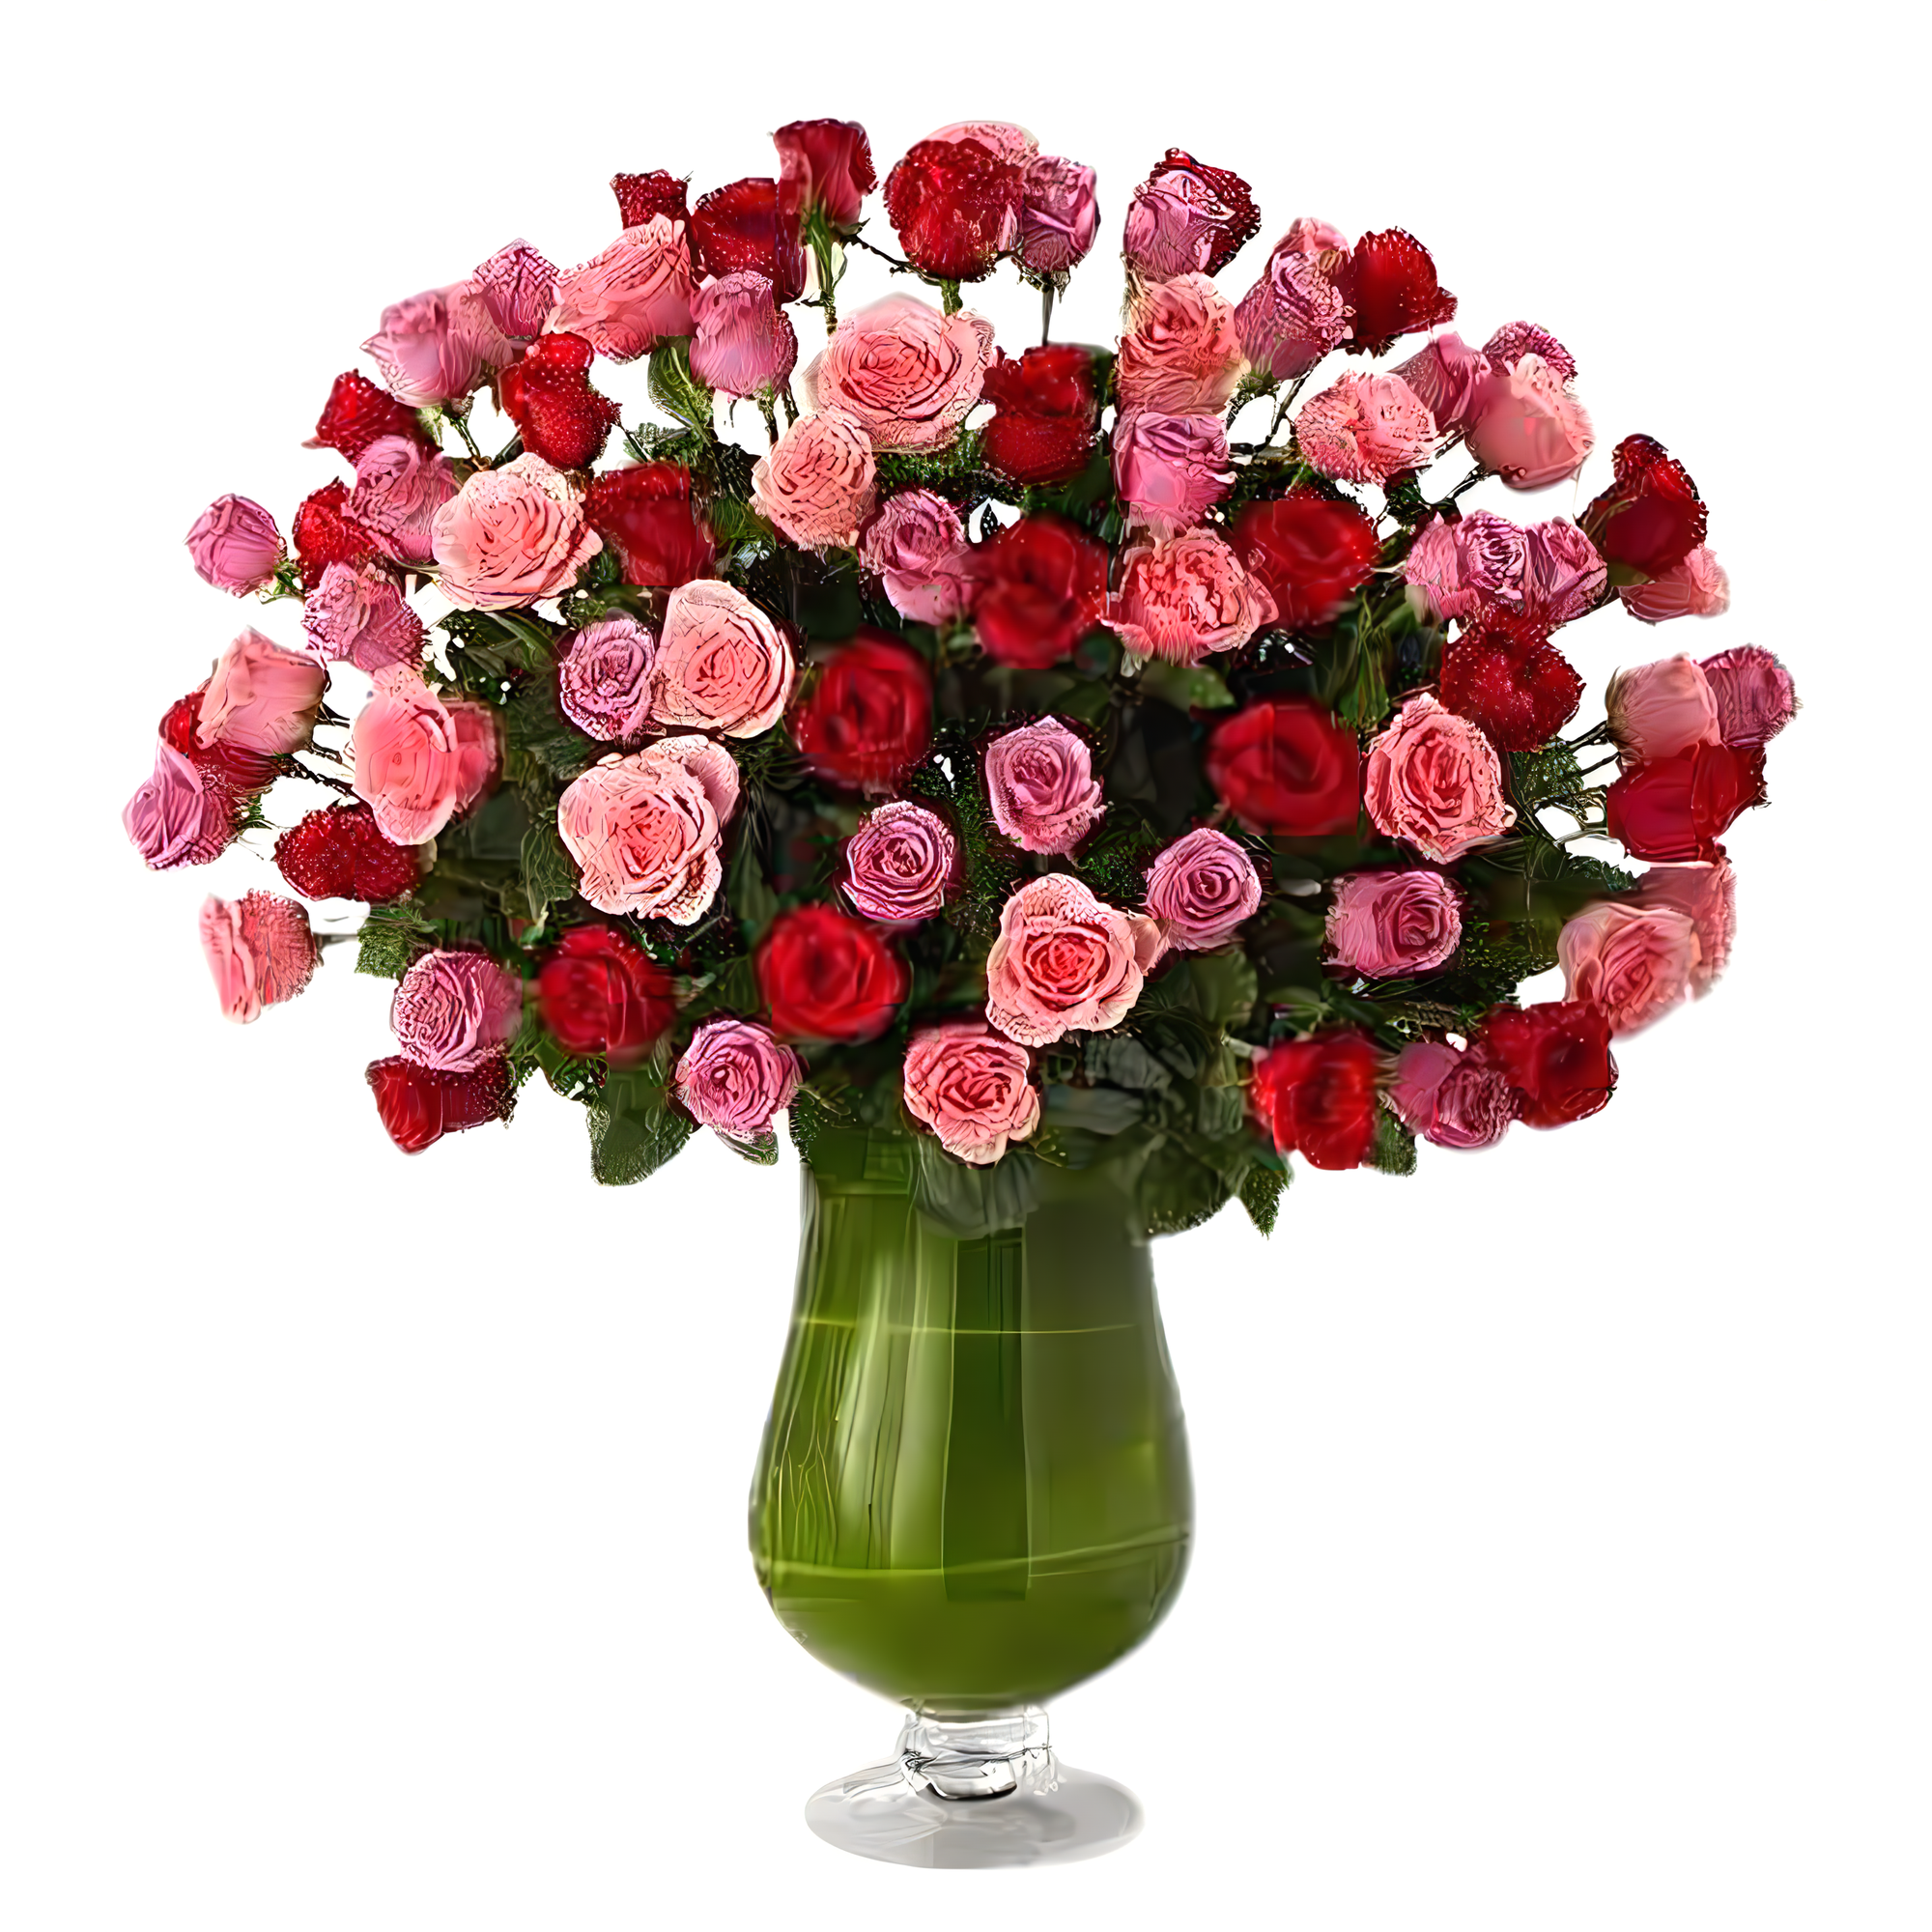 Luxury Rose Bouquet - 24 Premium Red, Pink, & Lavender Long-Stem Roses - Products > Luxury Collection